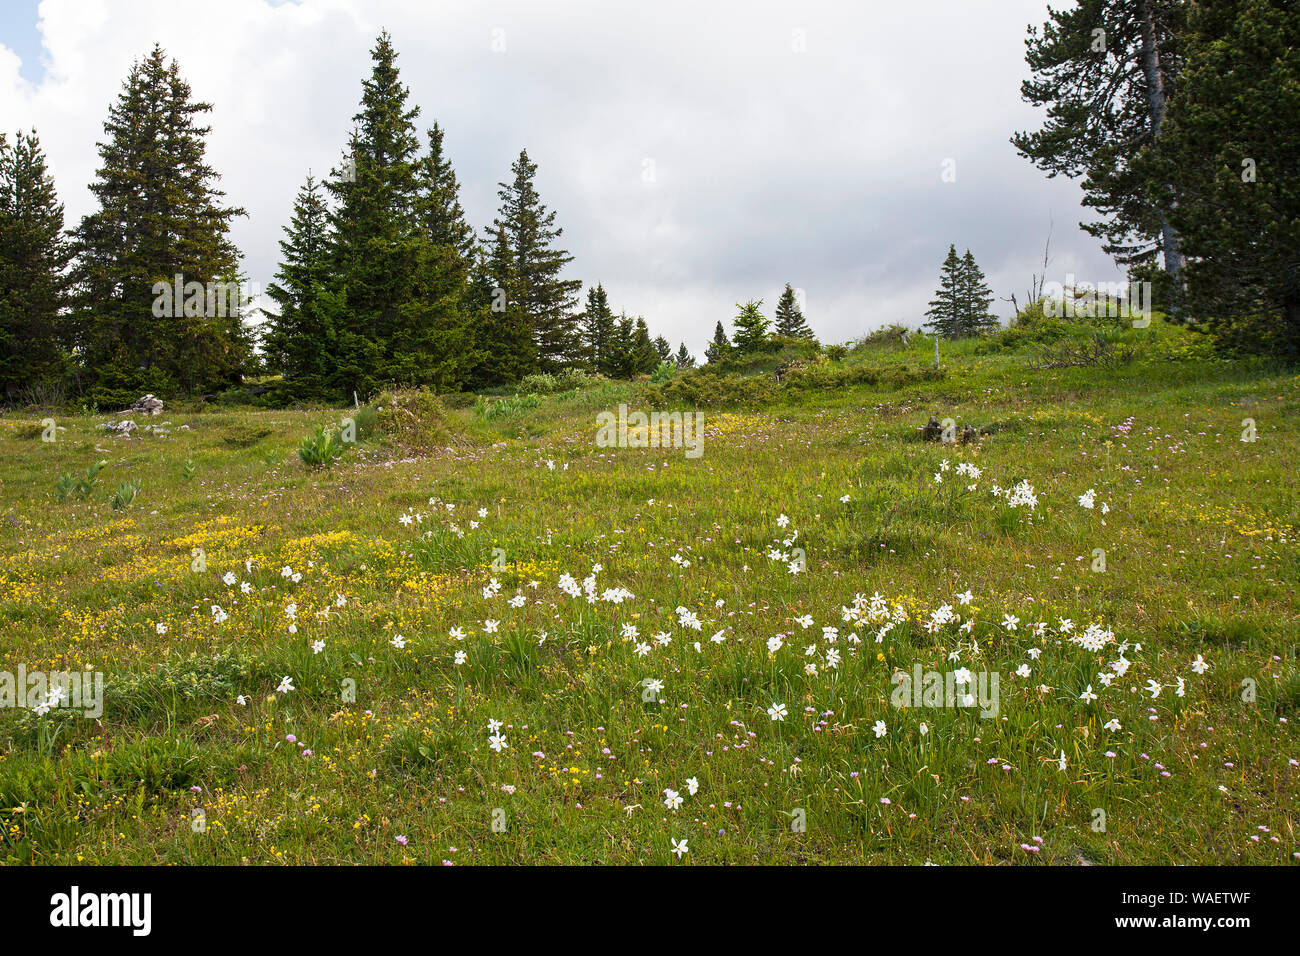 Poet's narcissus Narcissus poeticus with Norway spruce Picea abies beyond Hauts Plateaux Reserve Vercors Regional Natural Park France Stock Photo